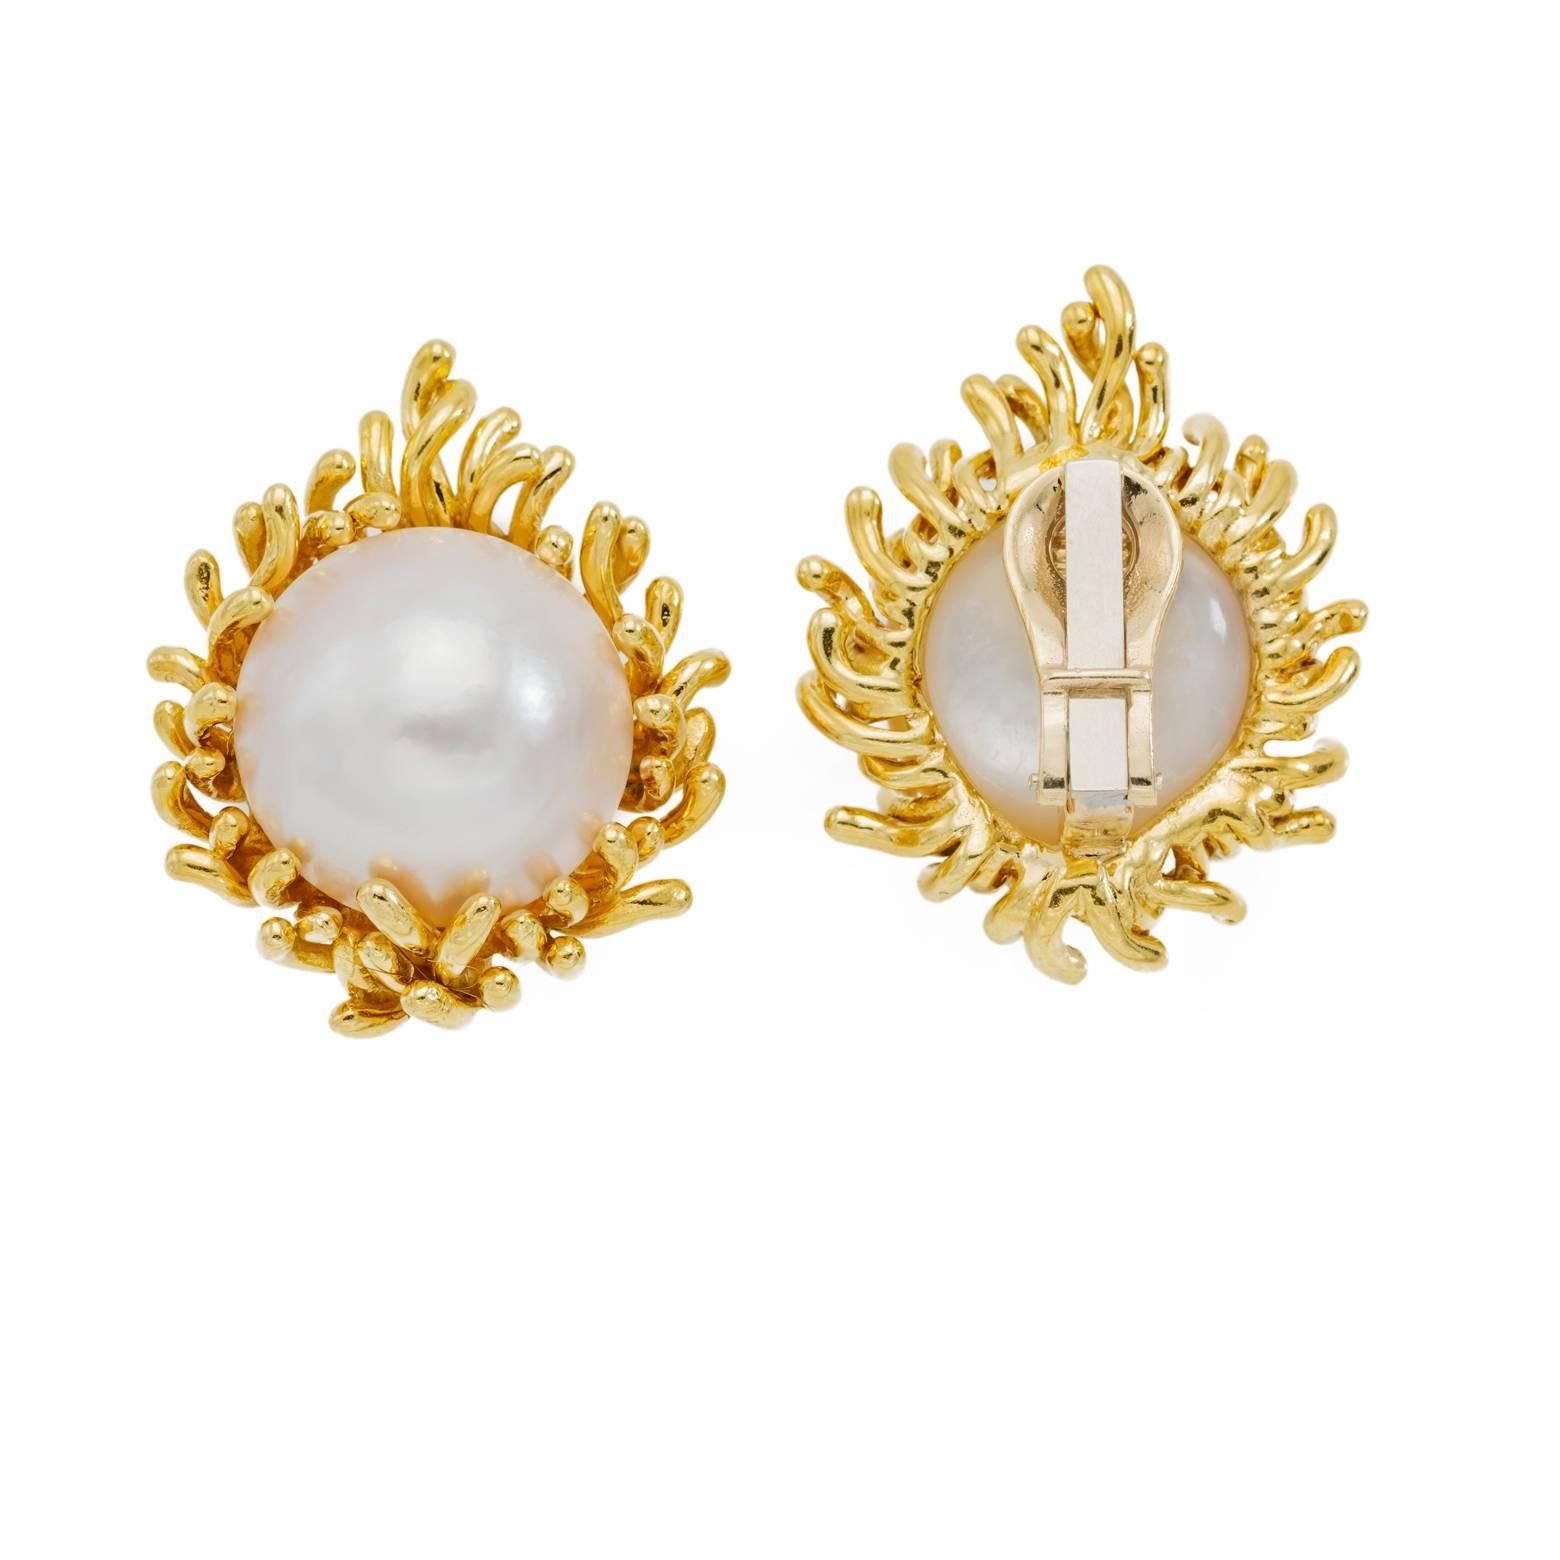 These mabe pearl clip on earrings are a beautiful hue of pinky white. The 18k gold surrounding the pearls is reminiscent of sea urchins creating a pair of stunning earrings.